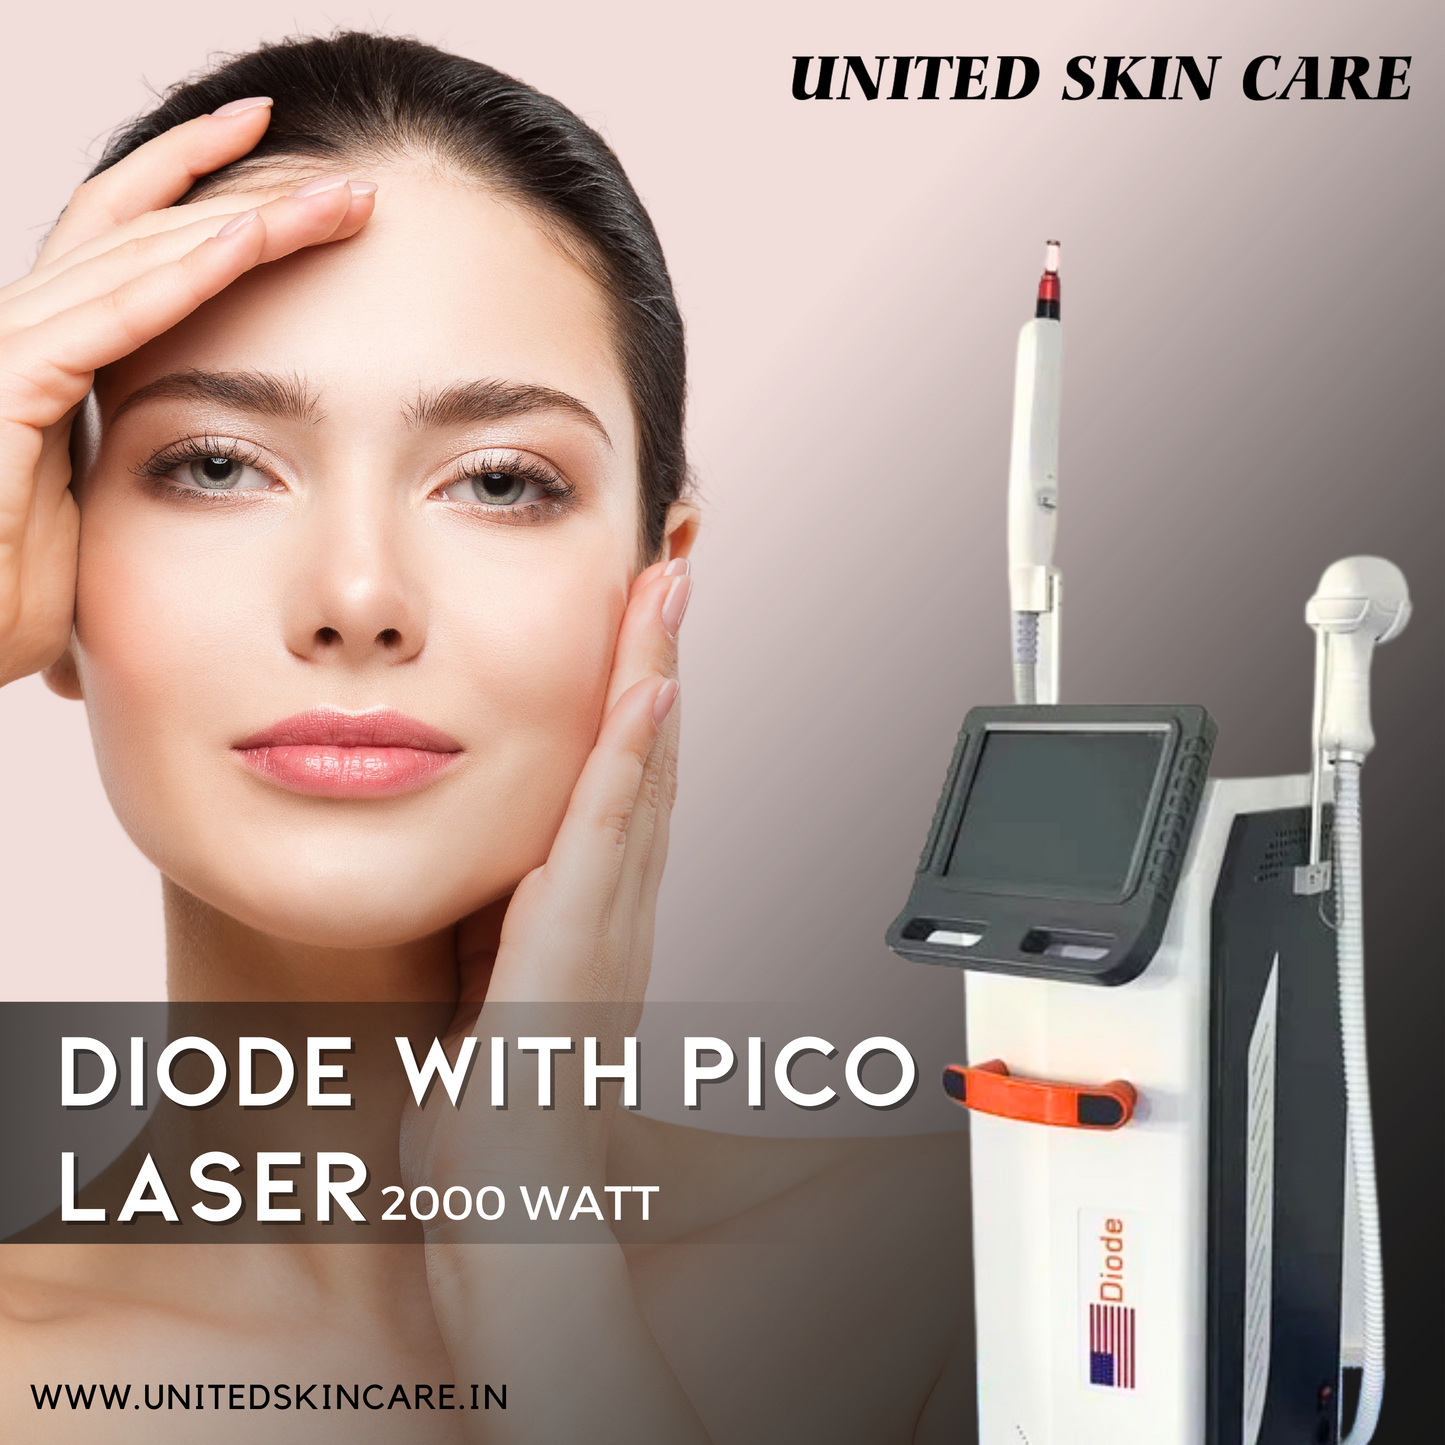 Diode with Pico Laser | Diode + Pico Laser | 2000 Watt Triple Wave Diode Laser | CE Approved | 2000 Watt QSwitch NdYAG Laser